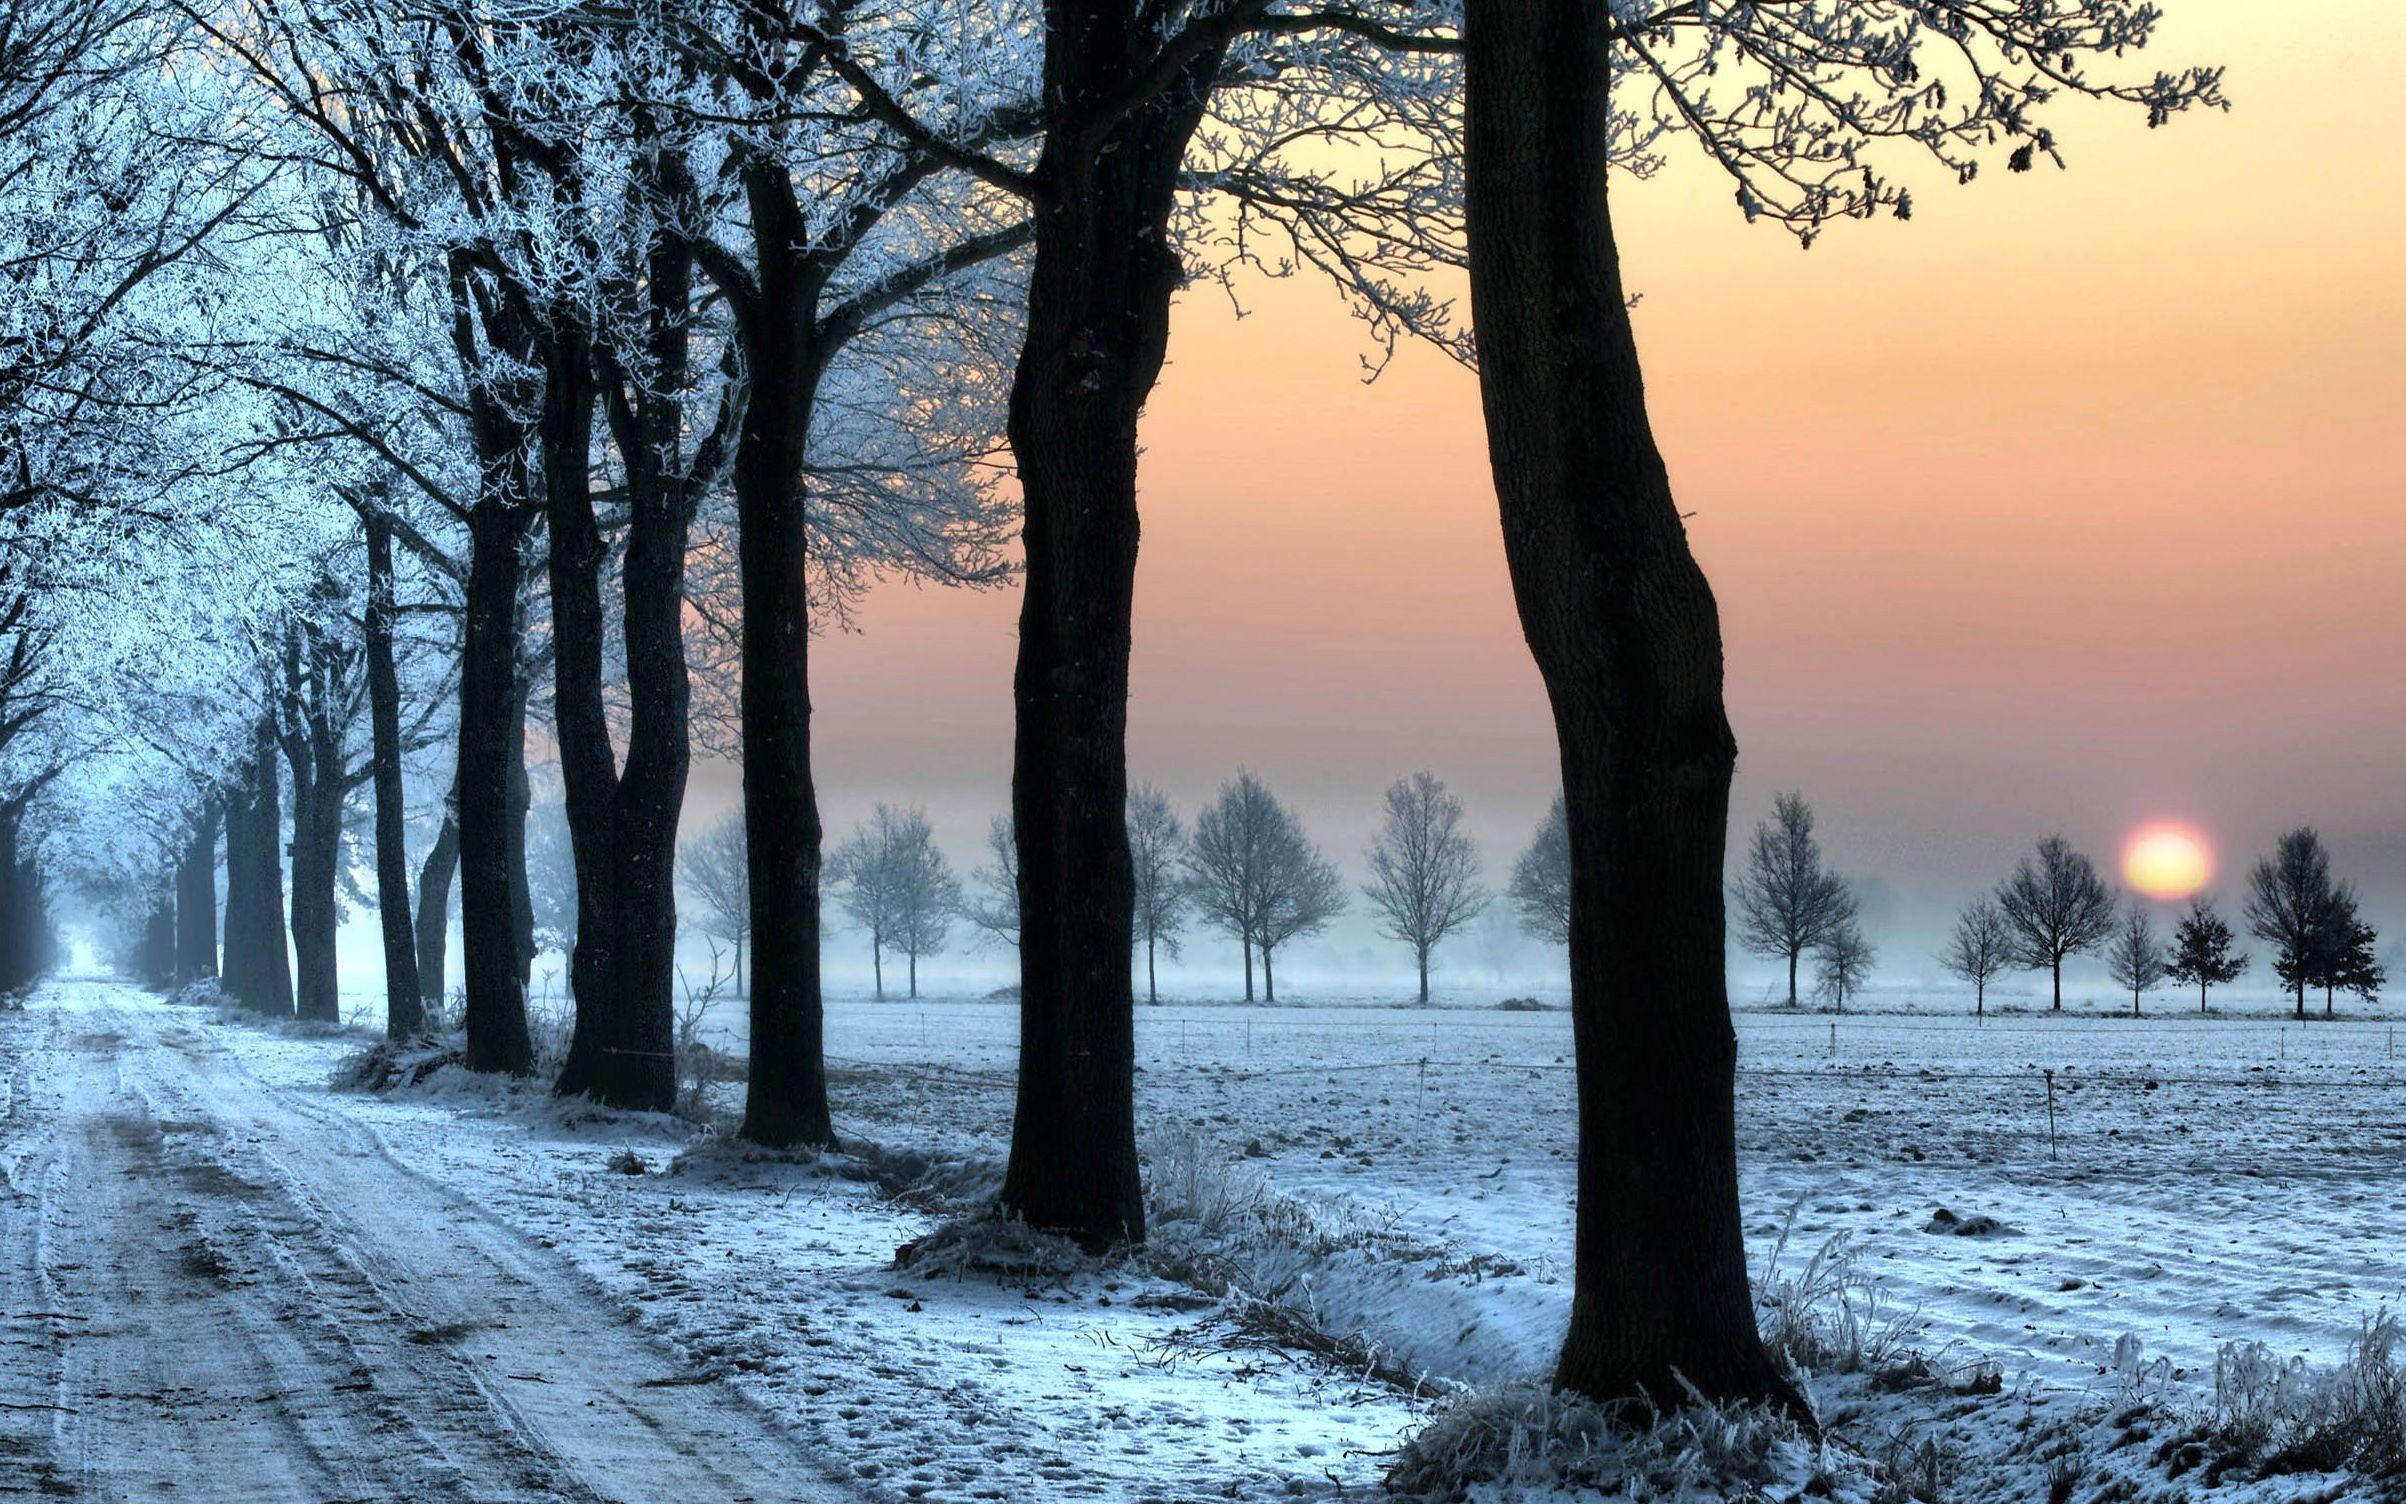 Lonely, Snowy, Road, Cool Nature Wallpaper, Amazing Landscape